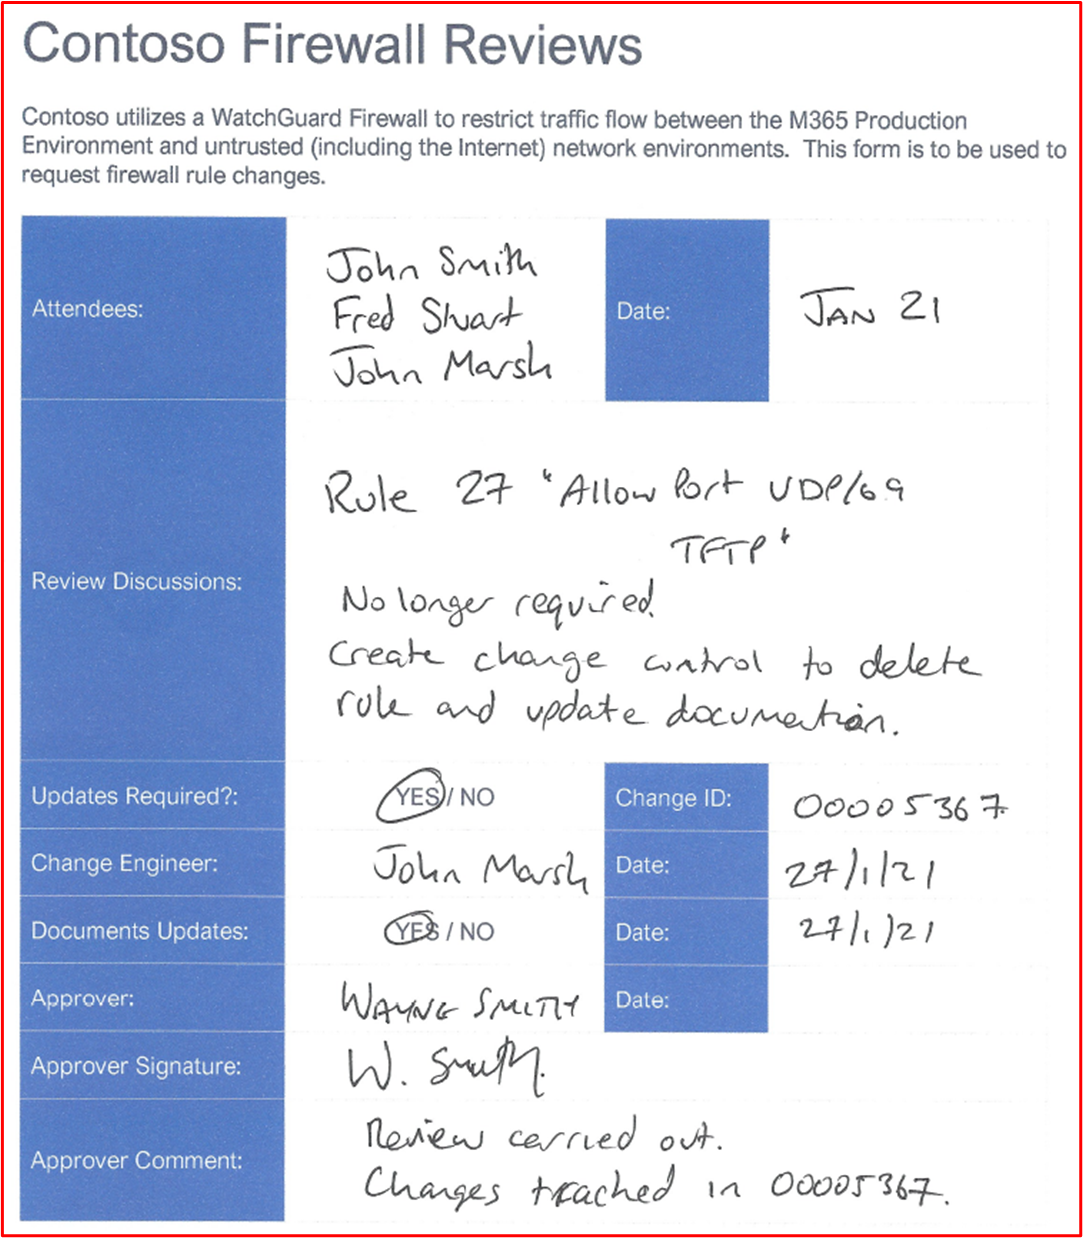 screenshot shows evidence of a Firewall review taking place in Jan 2021.